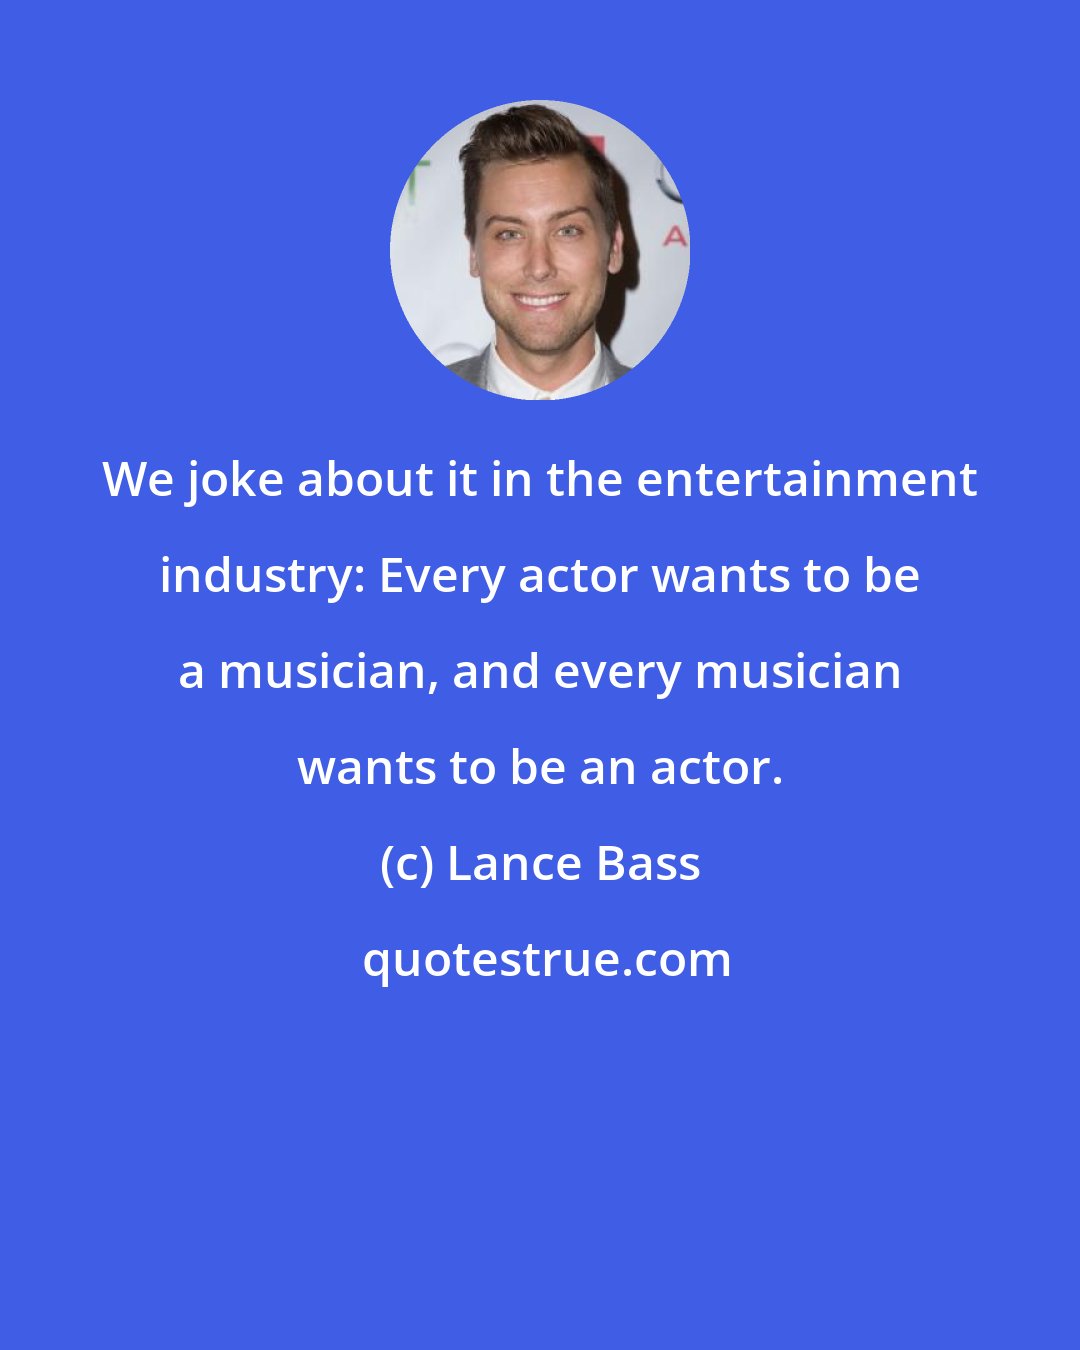 Lance Bass: We joke about it in the entertainment industry: Every actor wants to be a musician, and every musician wants to be an actor.